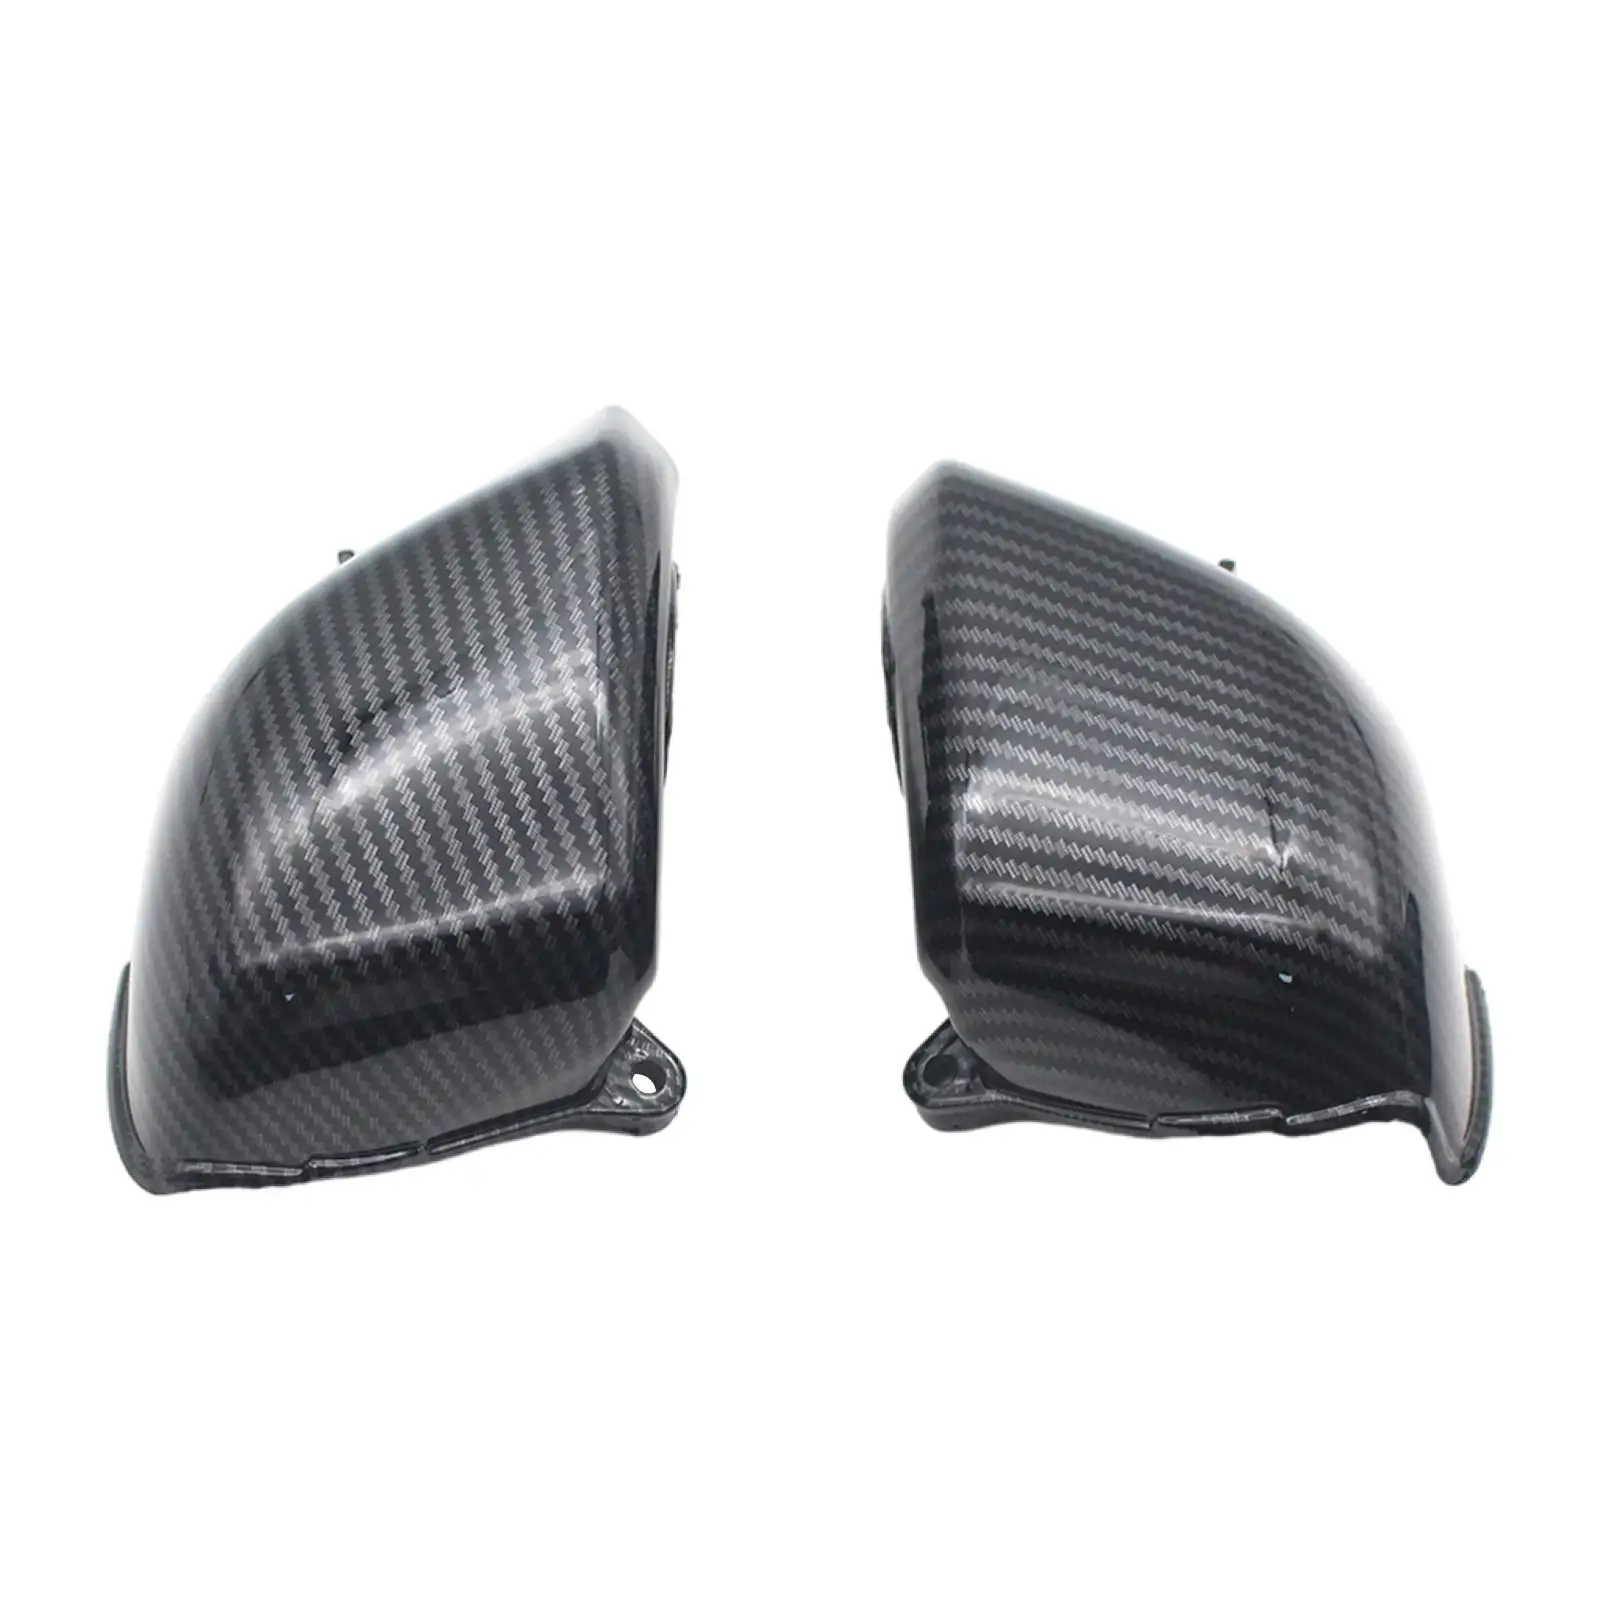 2x Air Motorbikes Parts for CB400 99-2007 CB 400